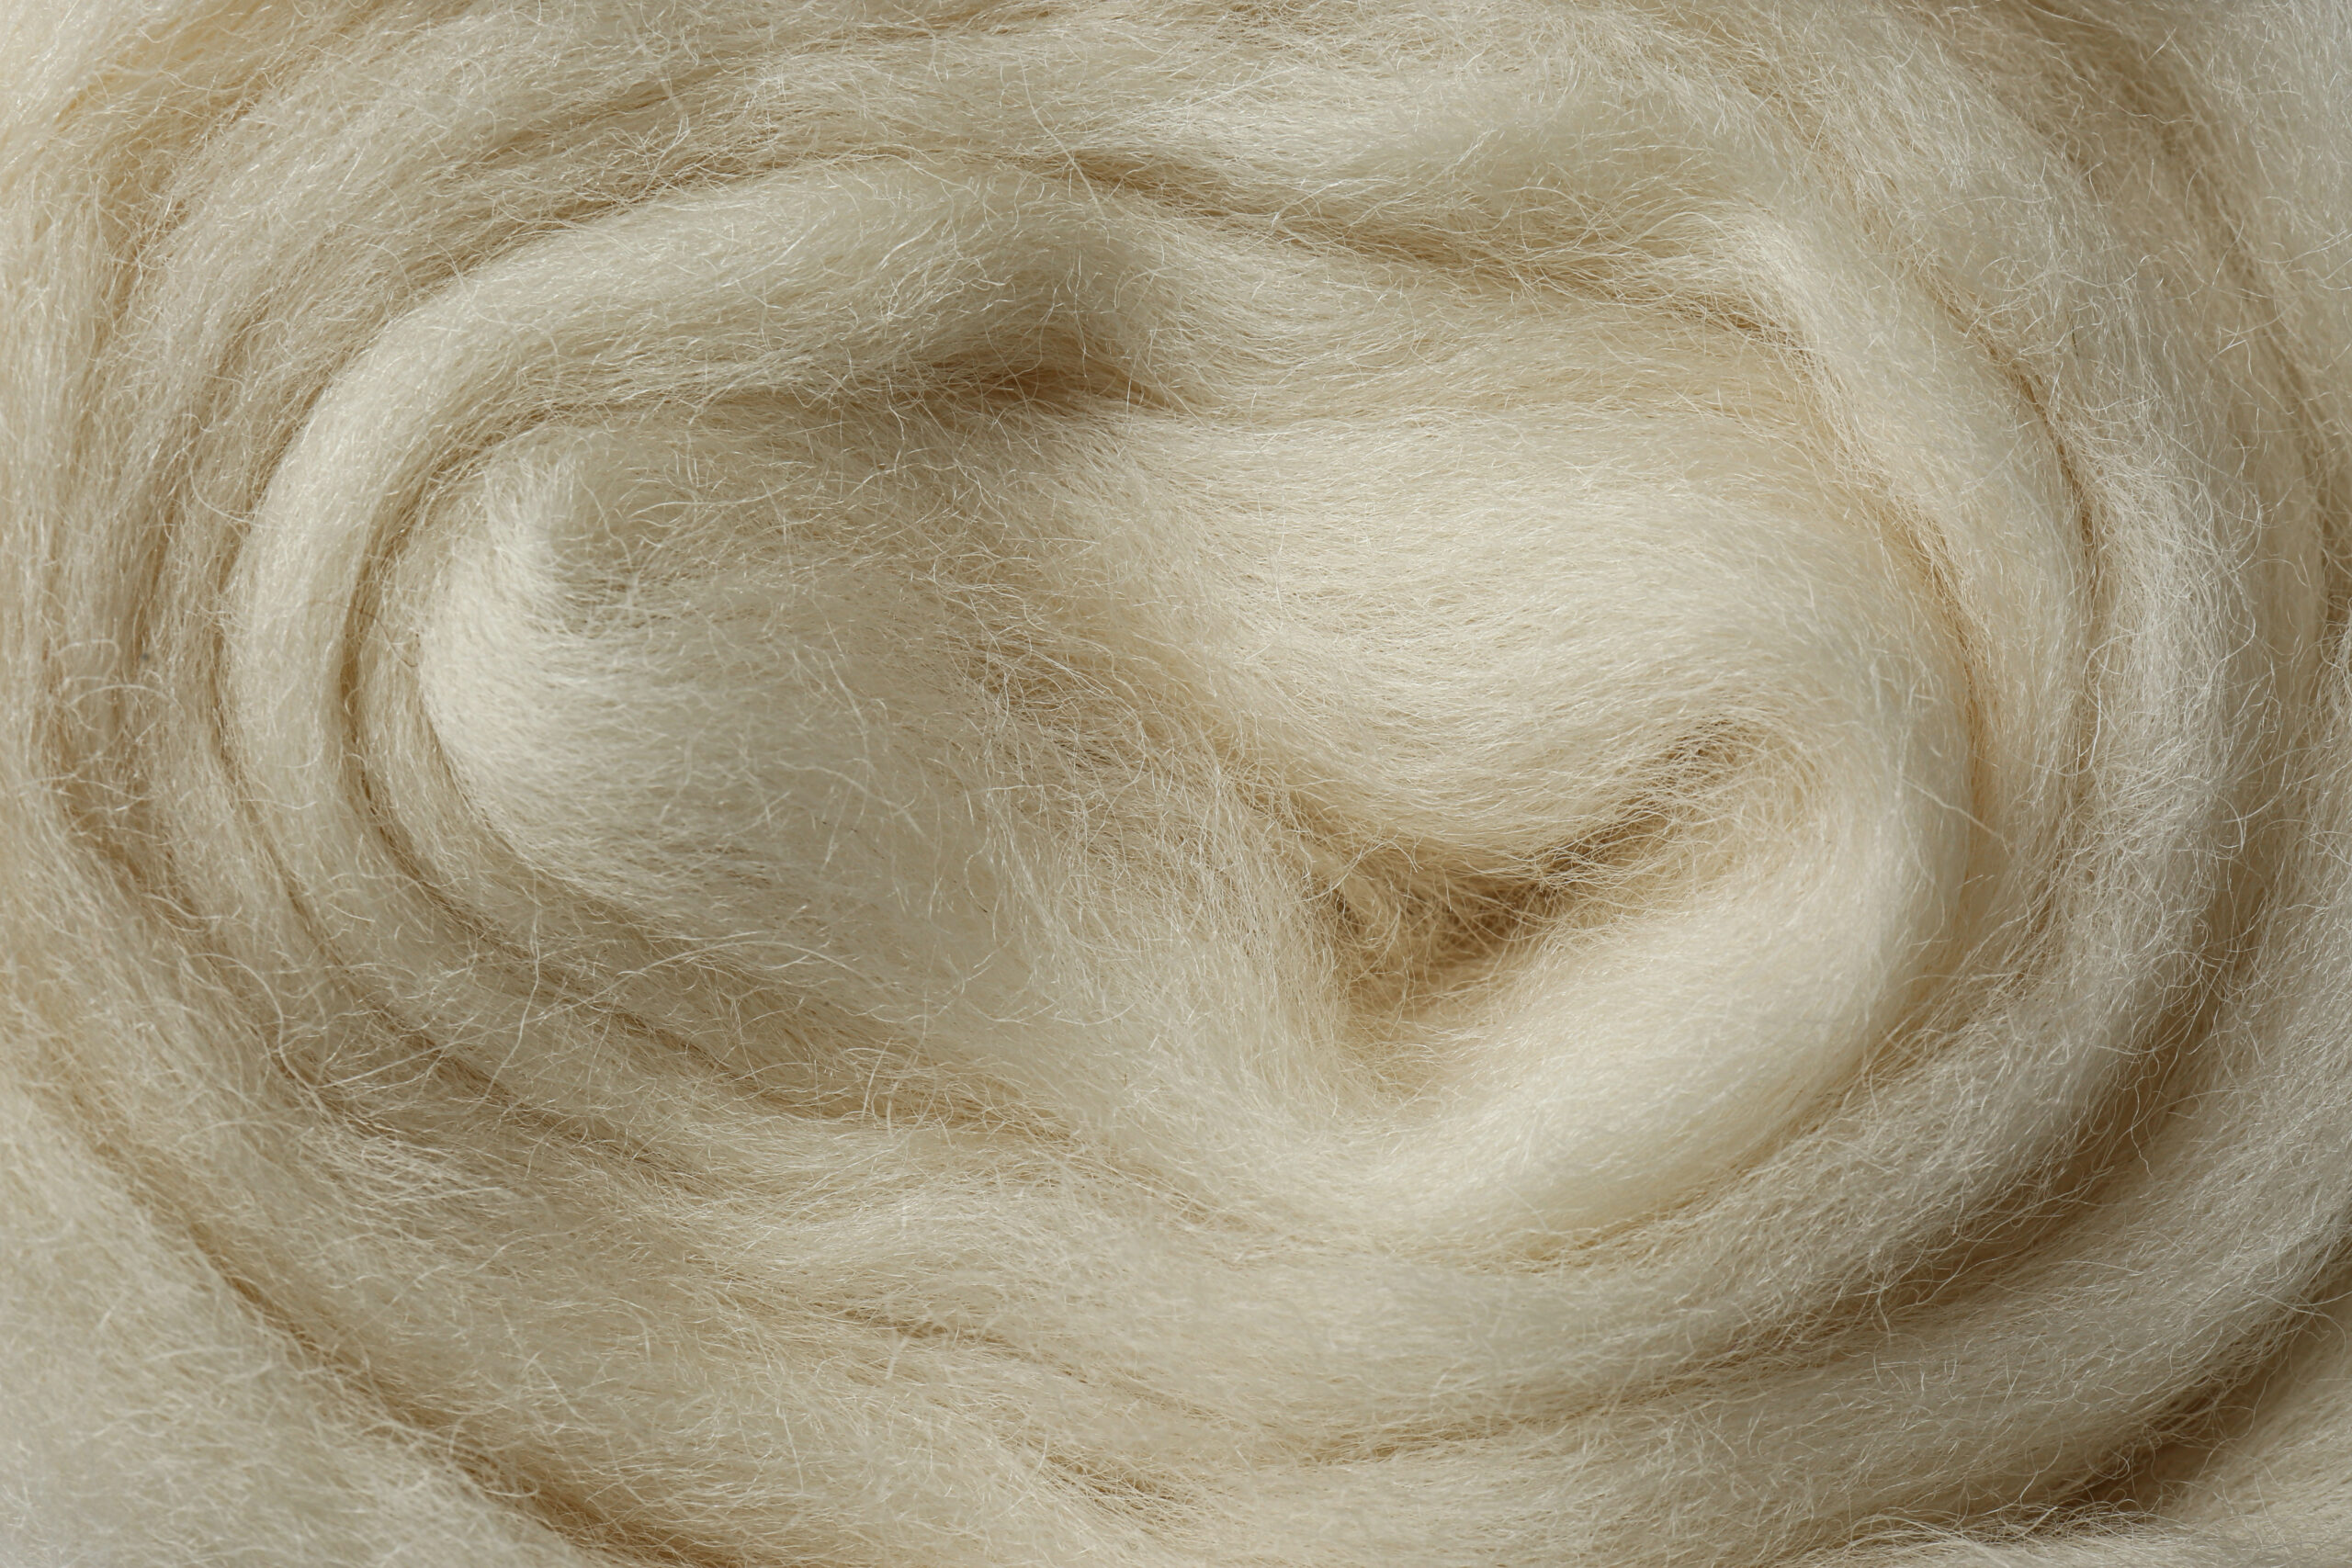 Combed white wool texture as background, closeup